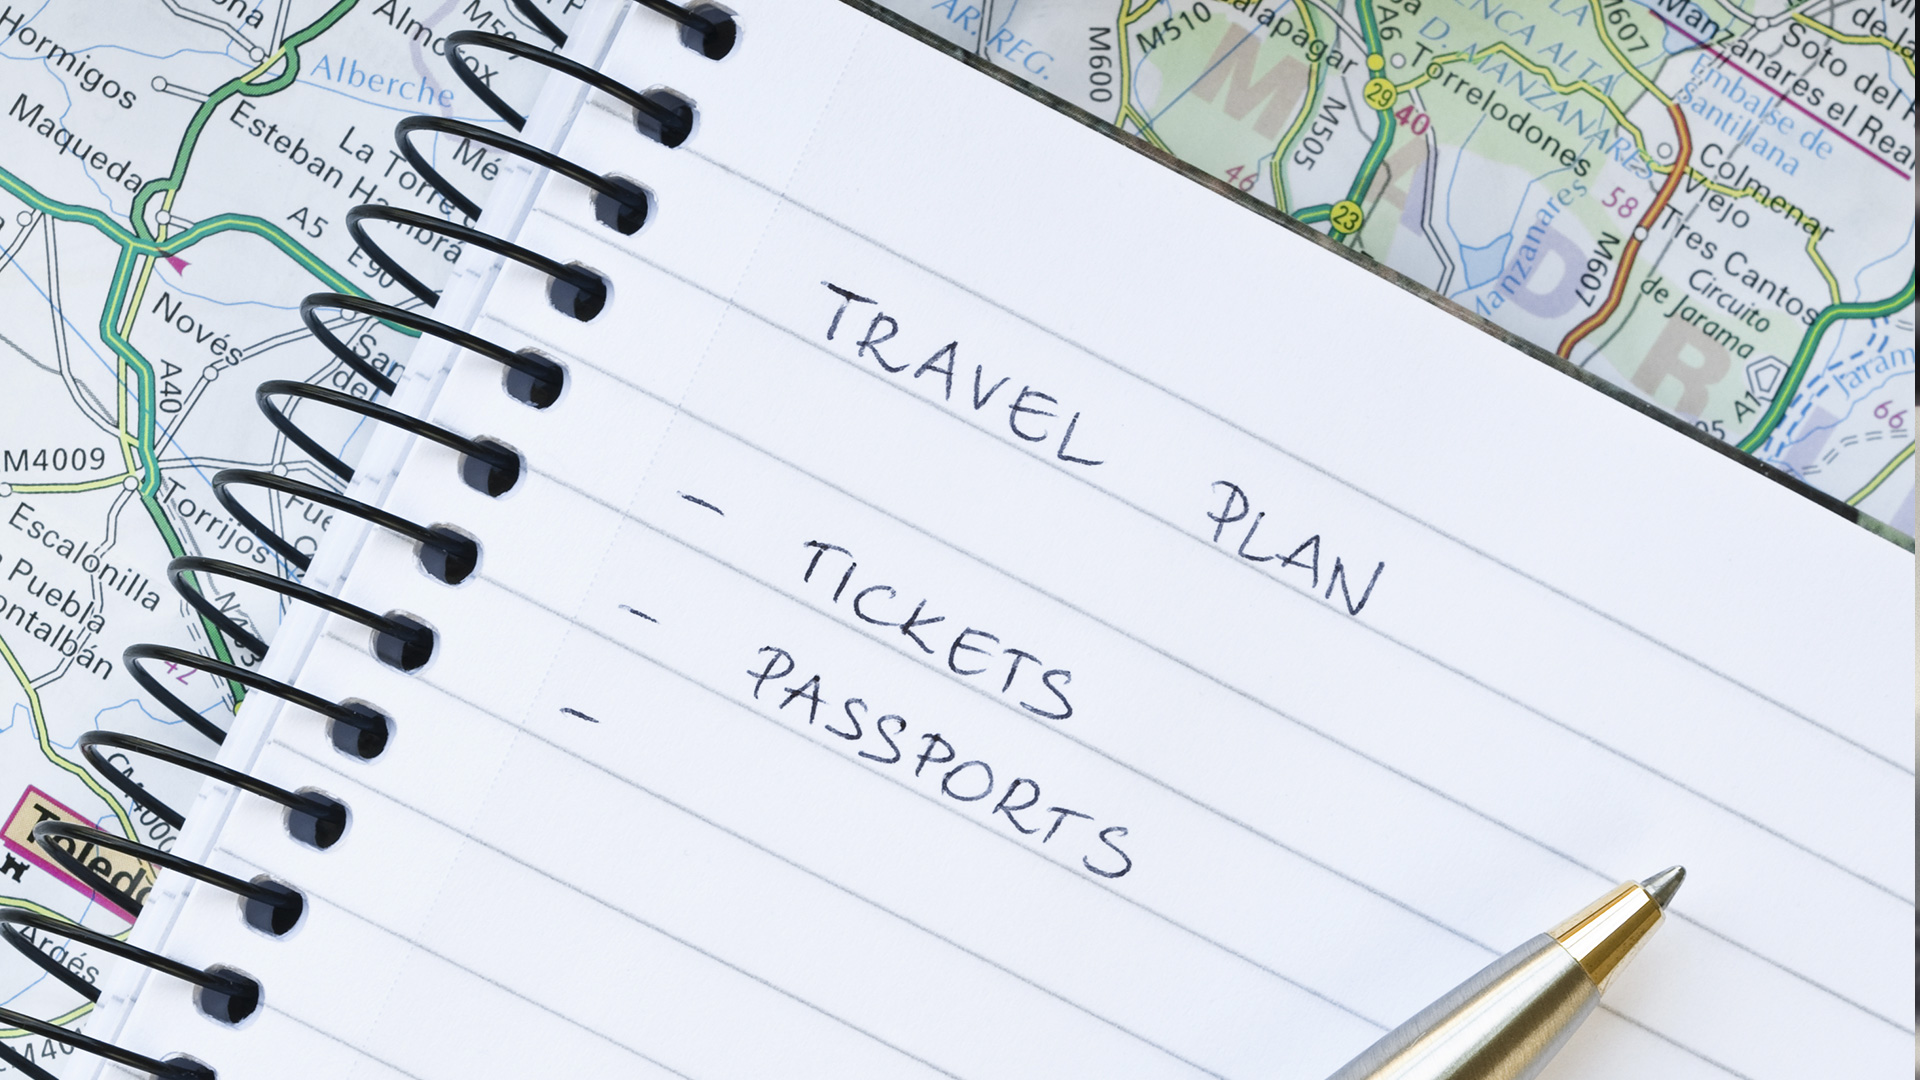 Top 10 Checklist Items Before Leaving for Vacation